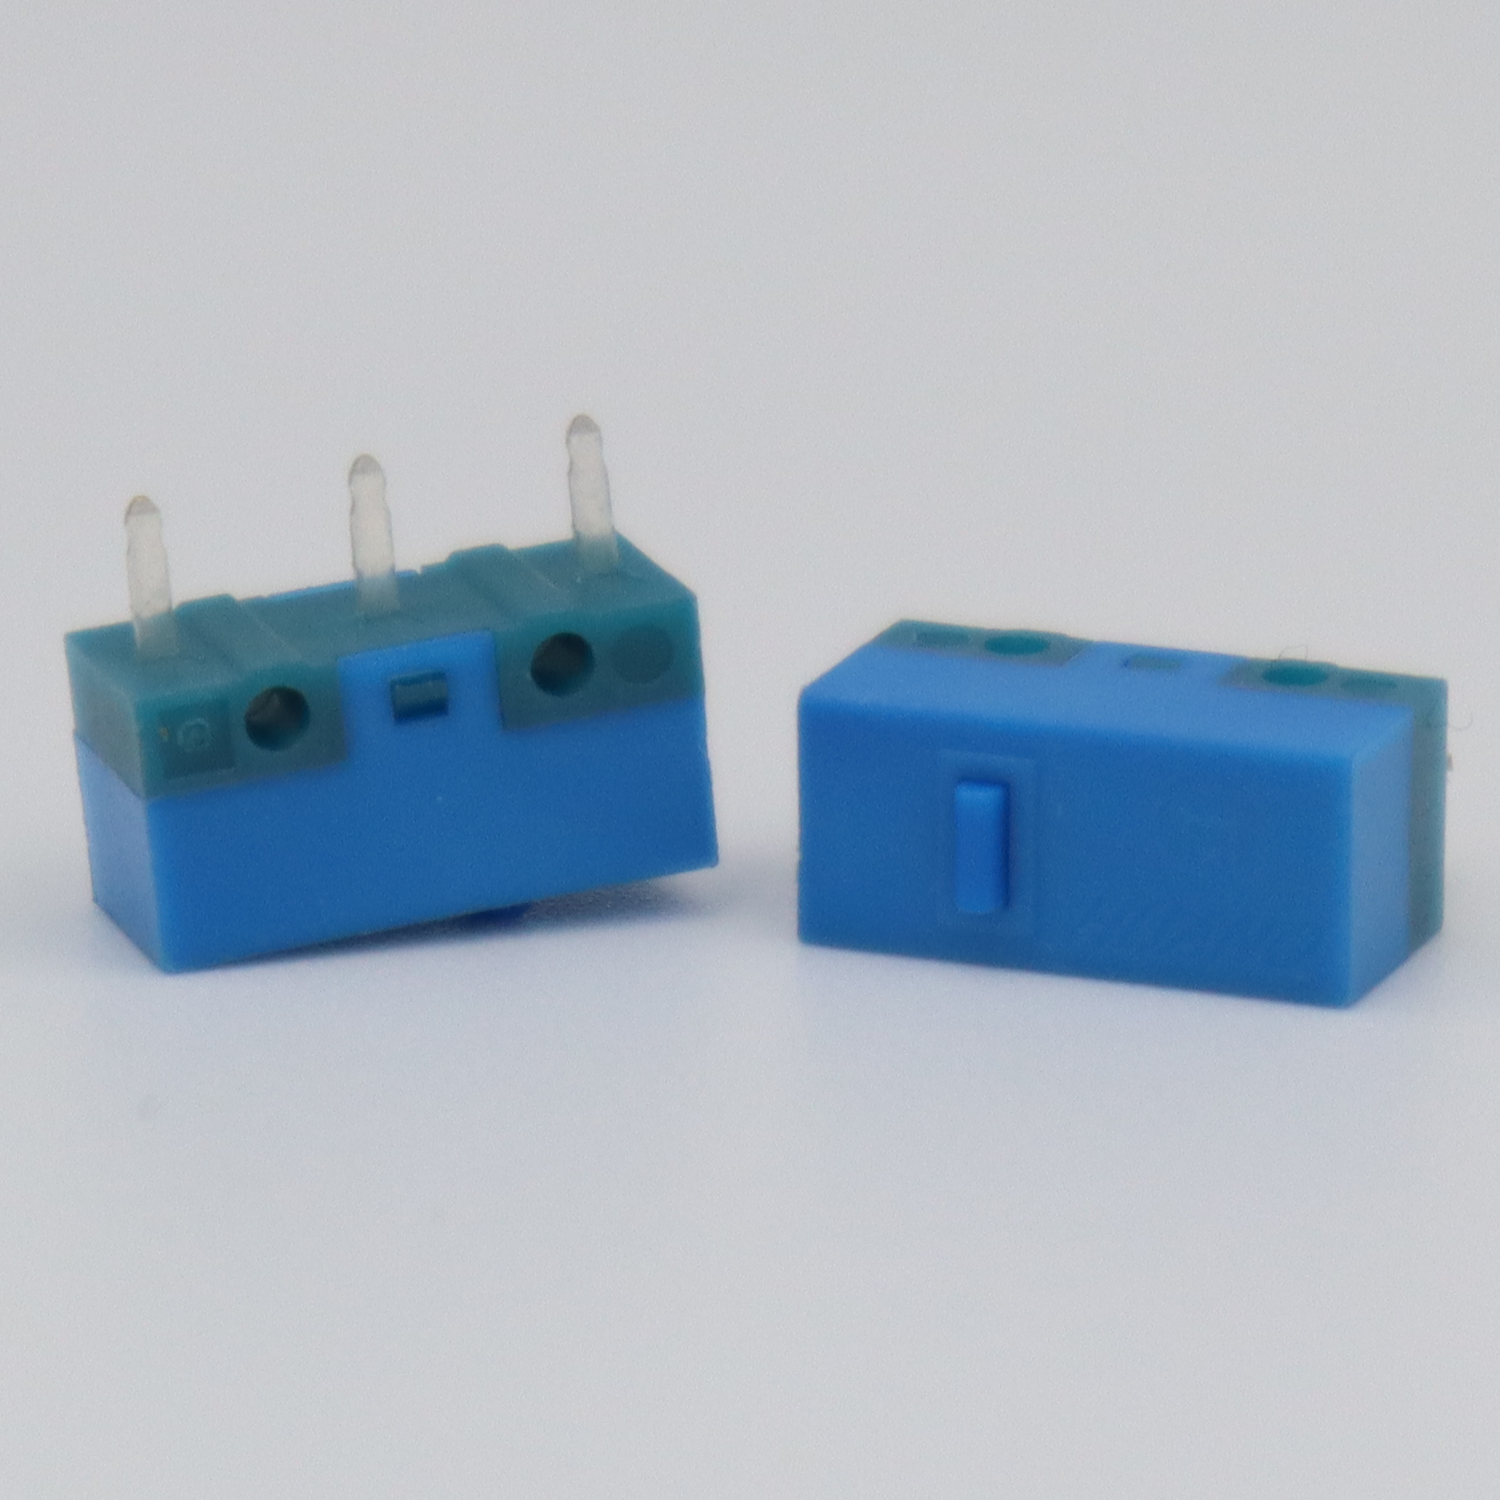 Huano Blue Shell Blue Dot Mouse Switch (2 adet)